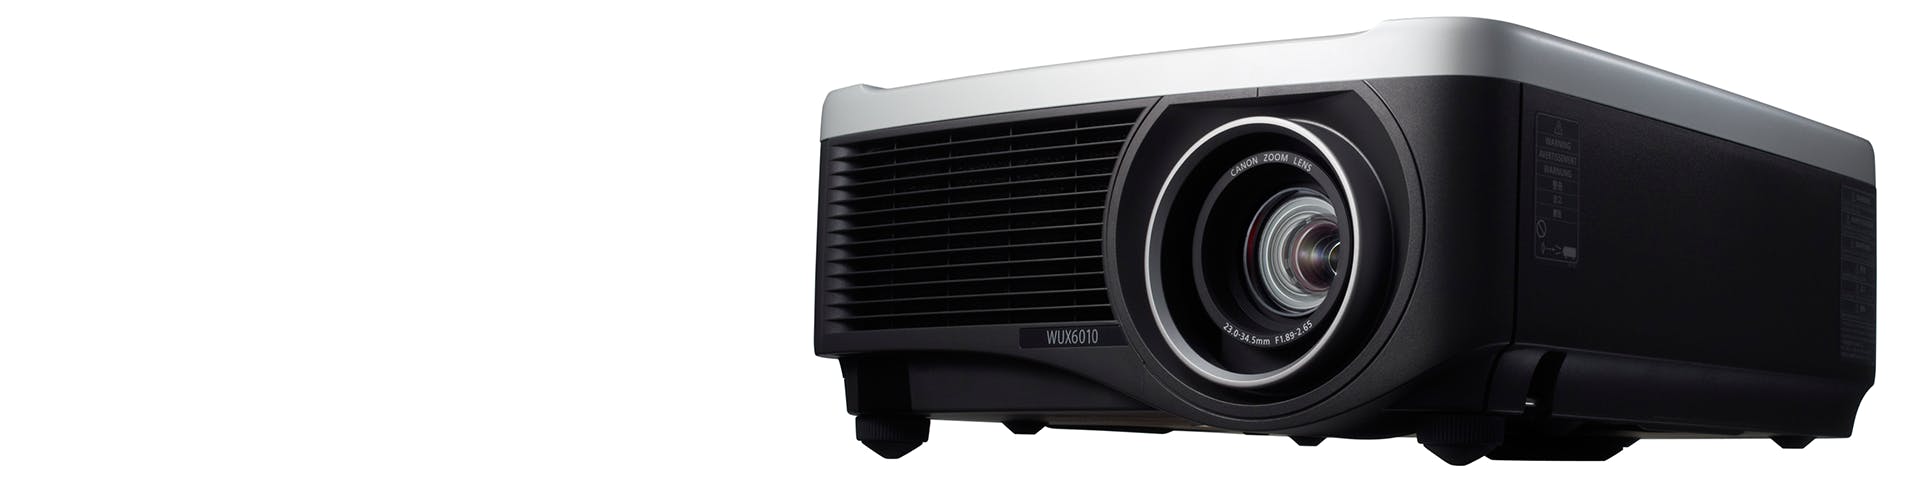 WUX6010 INSTALLATION LCOS PROJECTOR